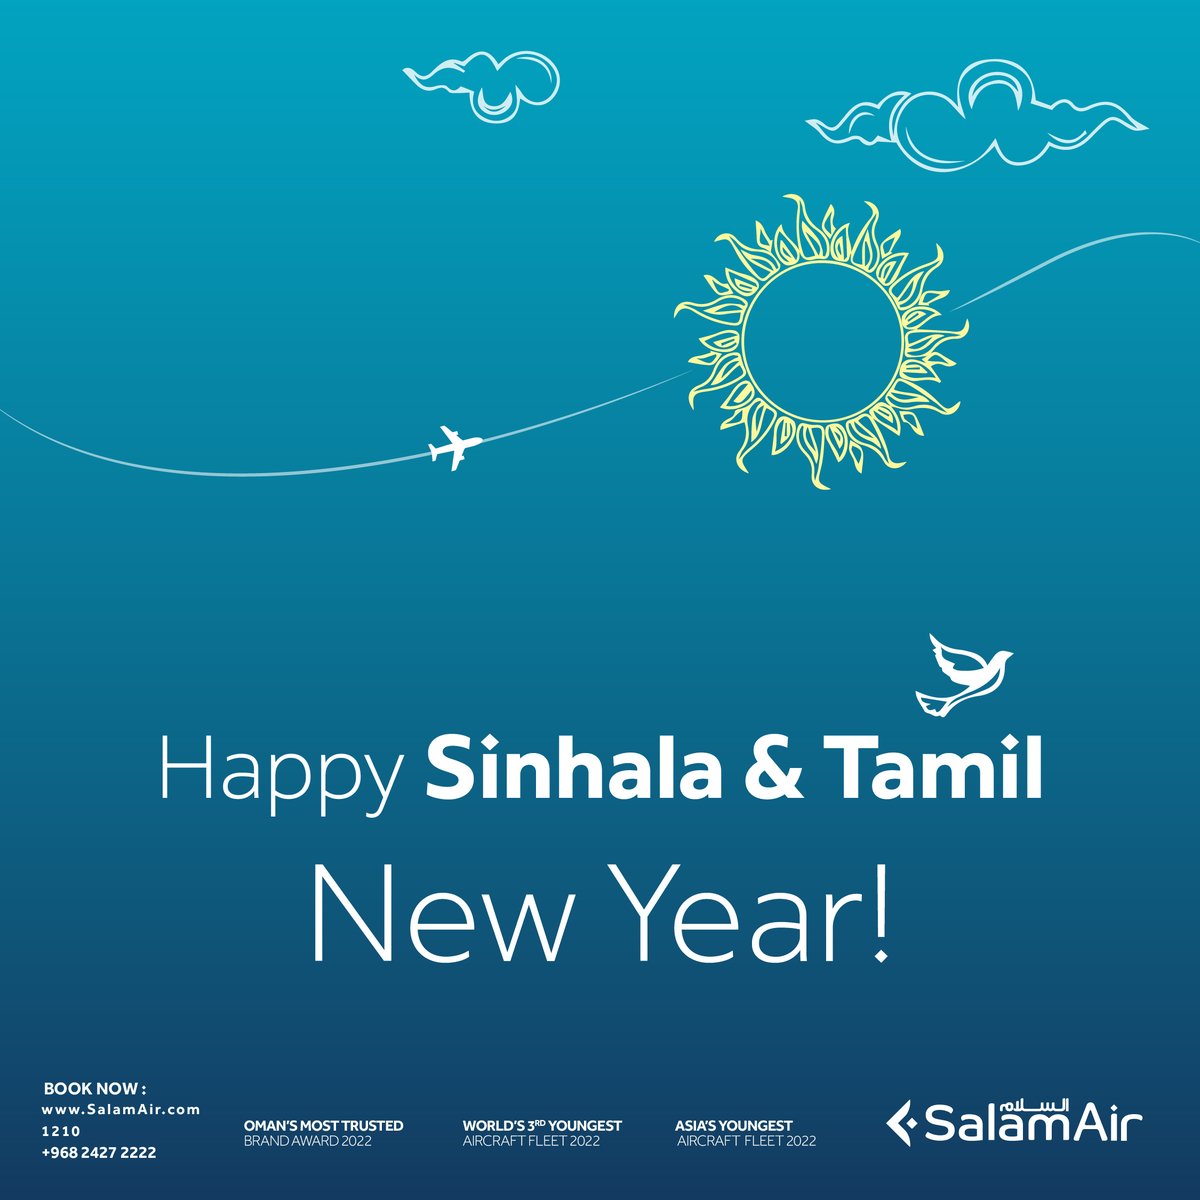 Happy Sinhala and Tamil new year!